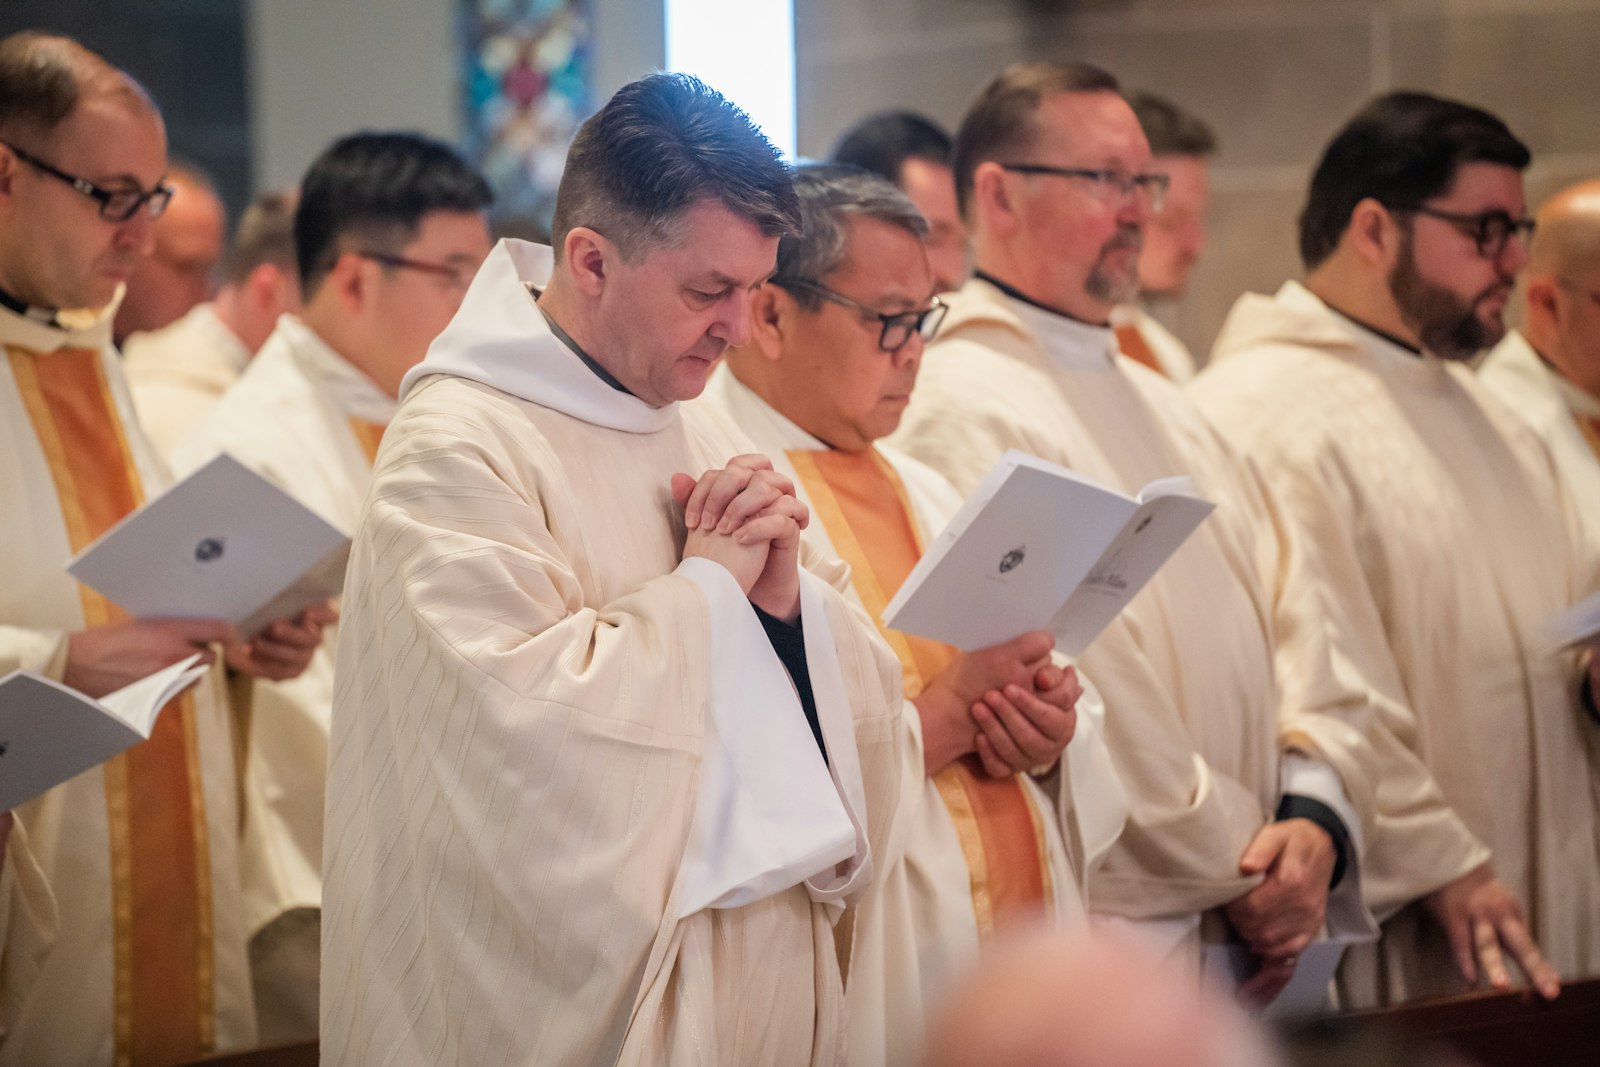 Priests of the Archdiocese of Detroit renew their priestly promises on Holy Thursday, which commemorates Christ's institution of the priesthood during the Last Supper.